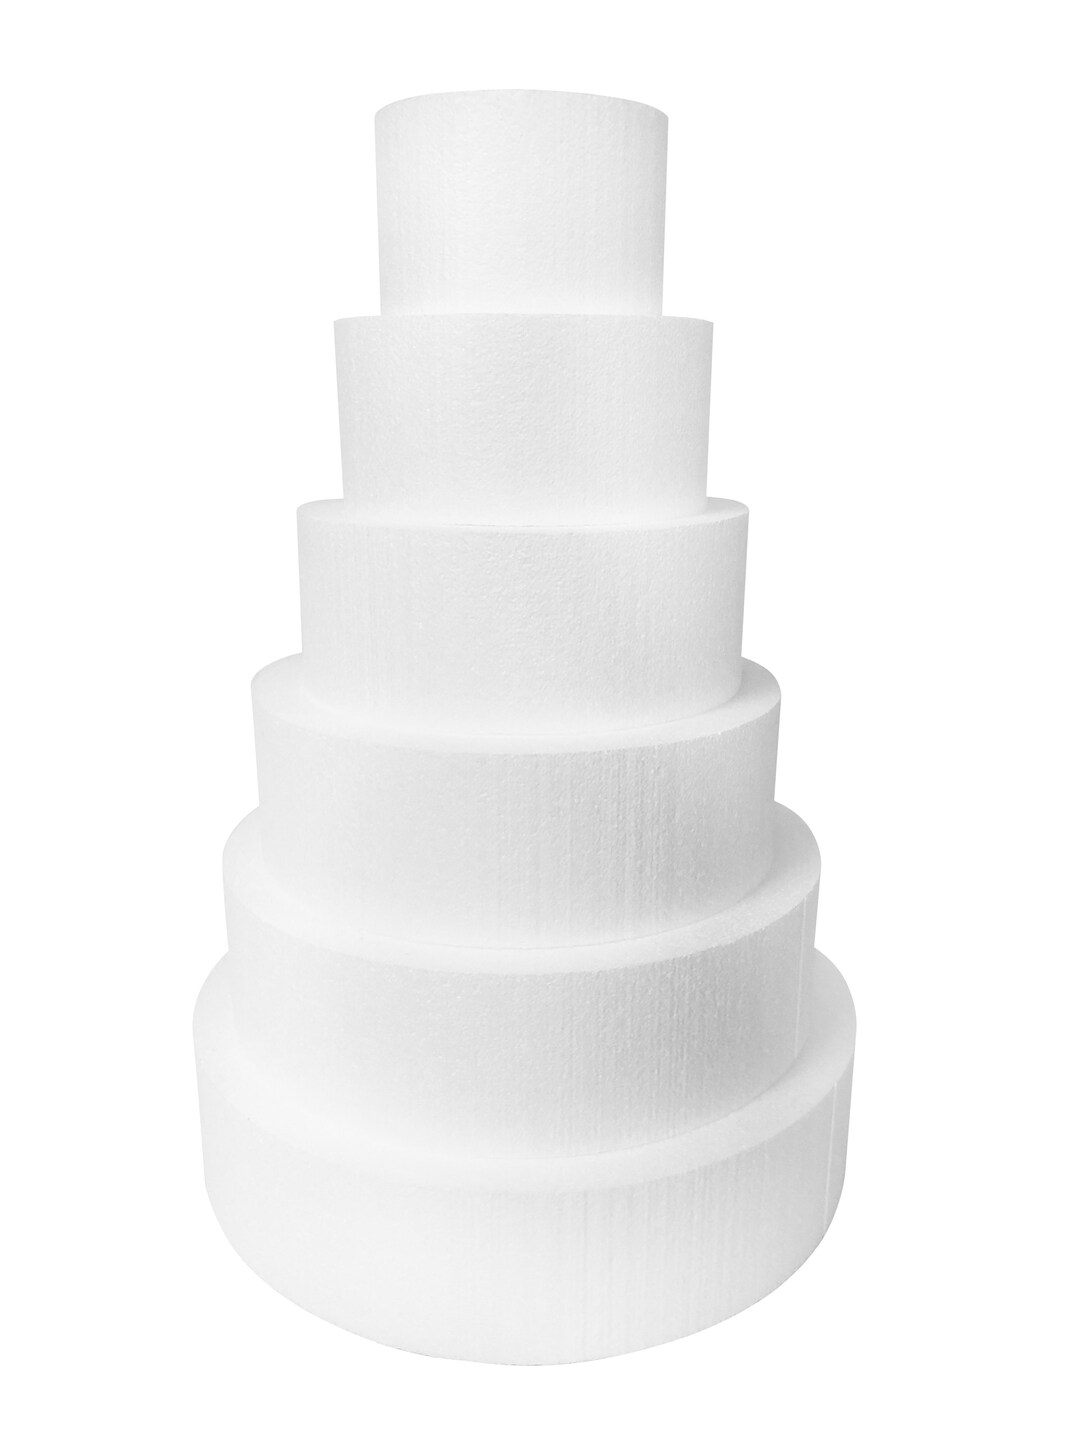 Shape Innovation - Round 3 Cake Dummy set - Set Of 5, Each 3 High By 6,  8, 10, 12, & 14 Round - Perfect for wedding cakes, birthday cakes